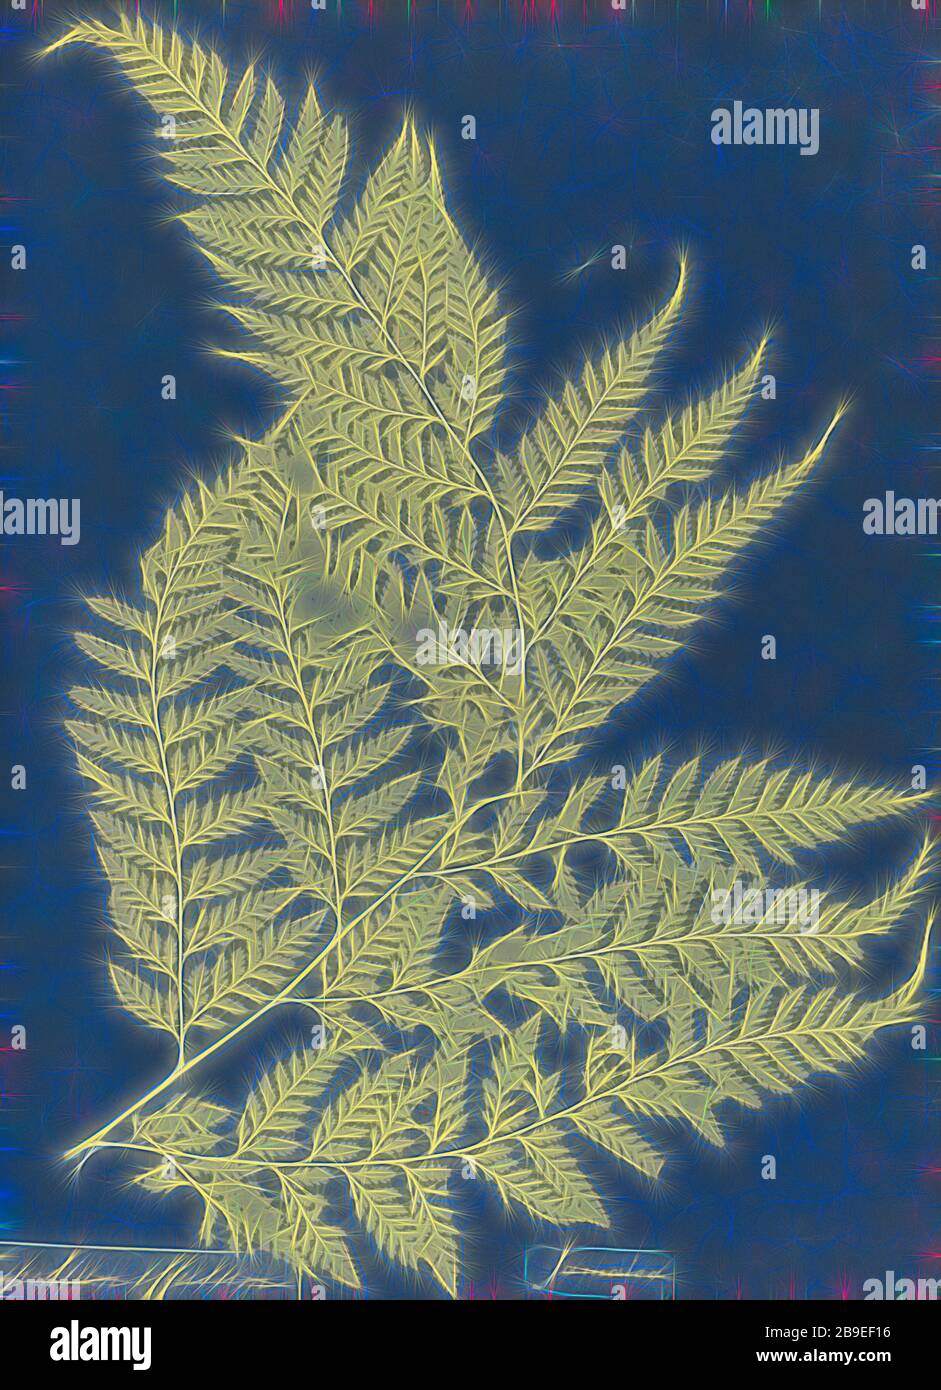 Polypodium effusum, Jamaica, Anna Atkins (British, 1799 - 1871), England, 1853, Cyanotype, 25.4 × 19.4 cm (10 × 7 5,8 in, Reimagined by Gibon, design of warm cheerful glowing of brightness and light rays radiance. Classic art reinvented with a modern twist. Photography inspired by futurism, embracing dynamic energy of modern technology, movement, speed and revolutionize culture. Stock Photo